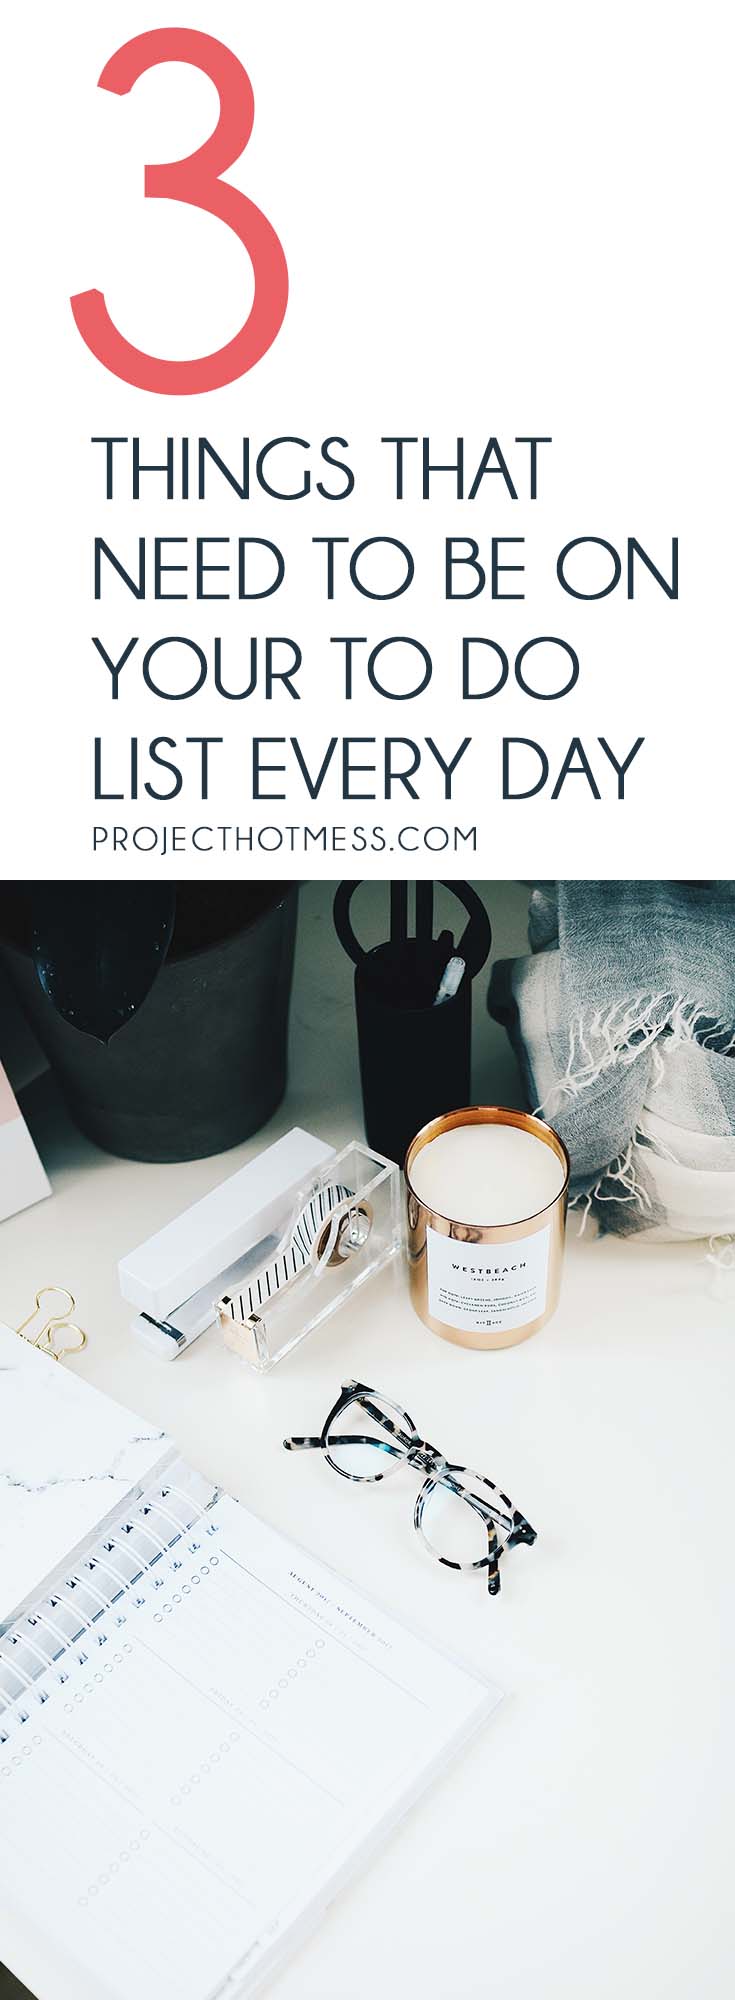 Stop overcomplicating your to do list and keep things simple! Focus on these 3 things that need to be on your to do list every day and feel good about it. To Do List | Productivity | 